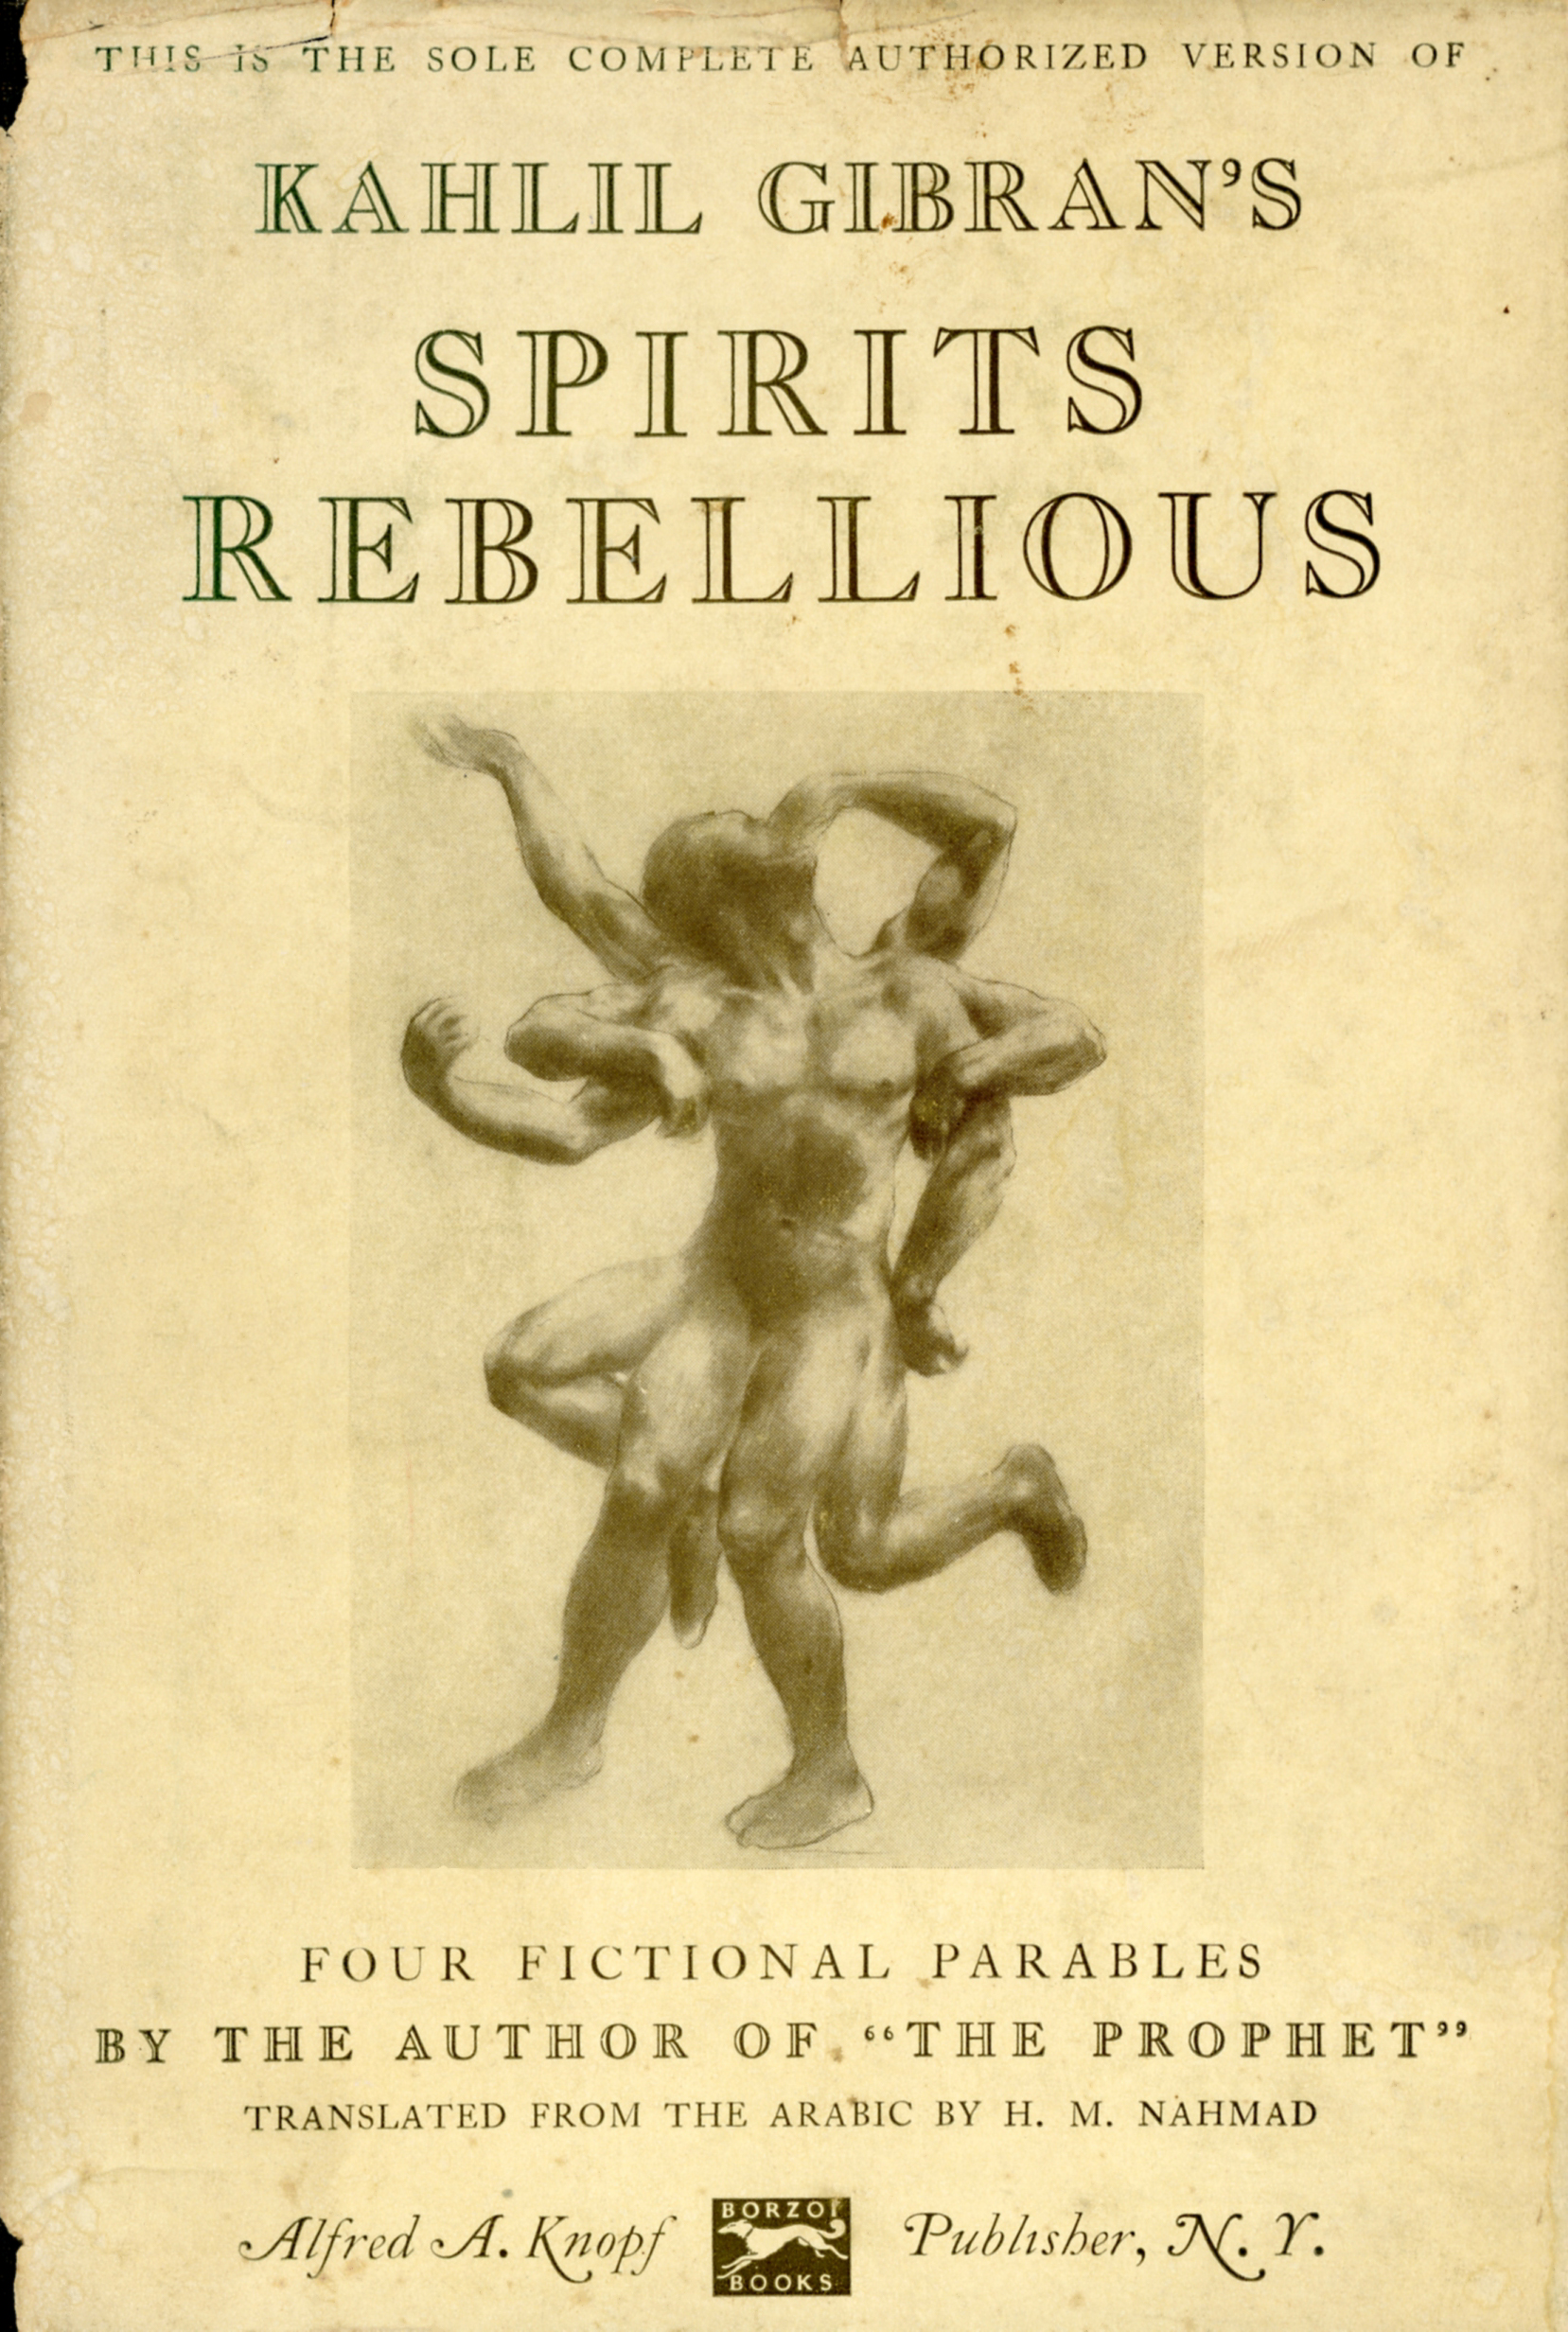 K. Gibran, Spirits Rebellious, Translated from the Arabic and with an Introduction by H.M. Nahmad, New York: Knopf, 1948.